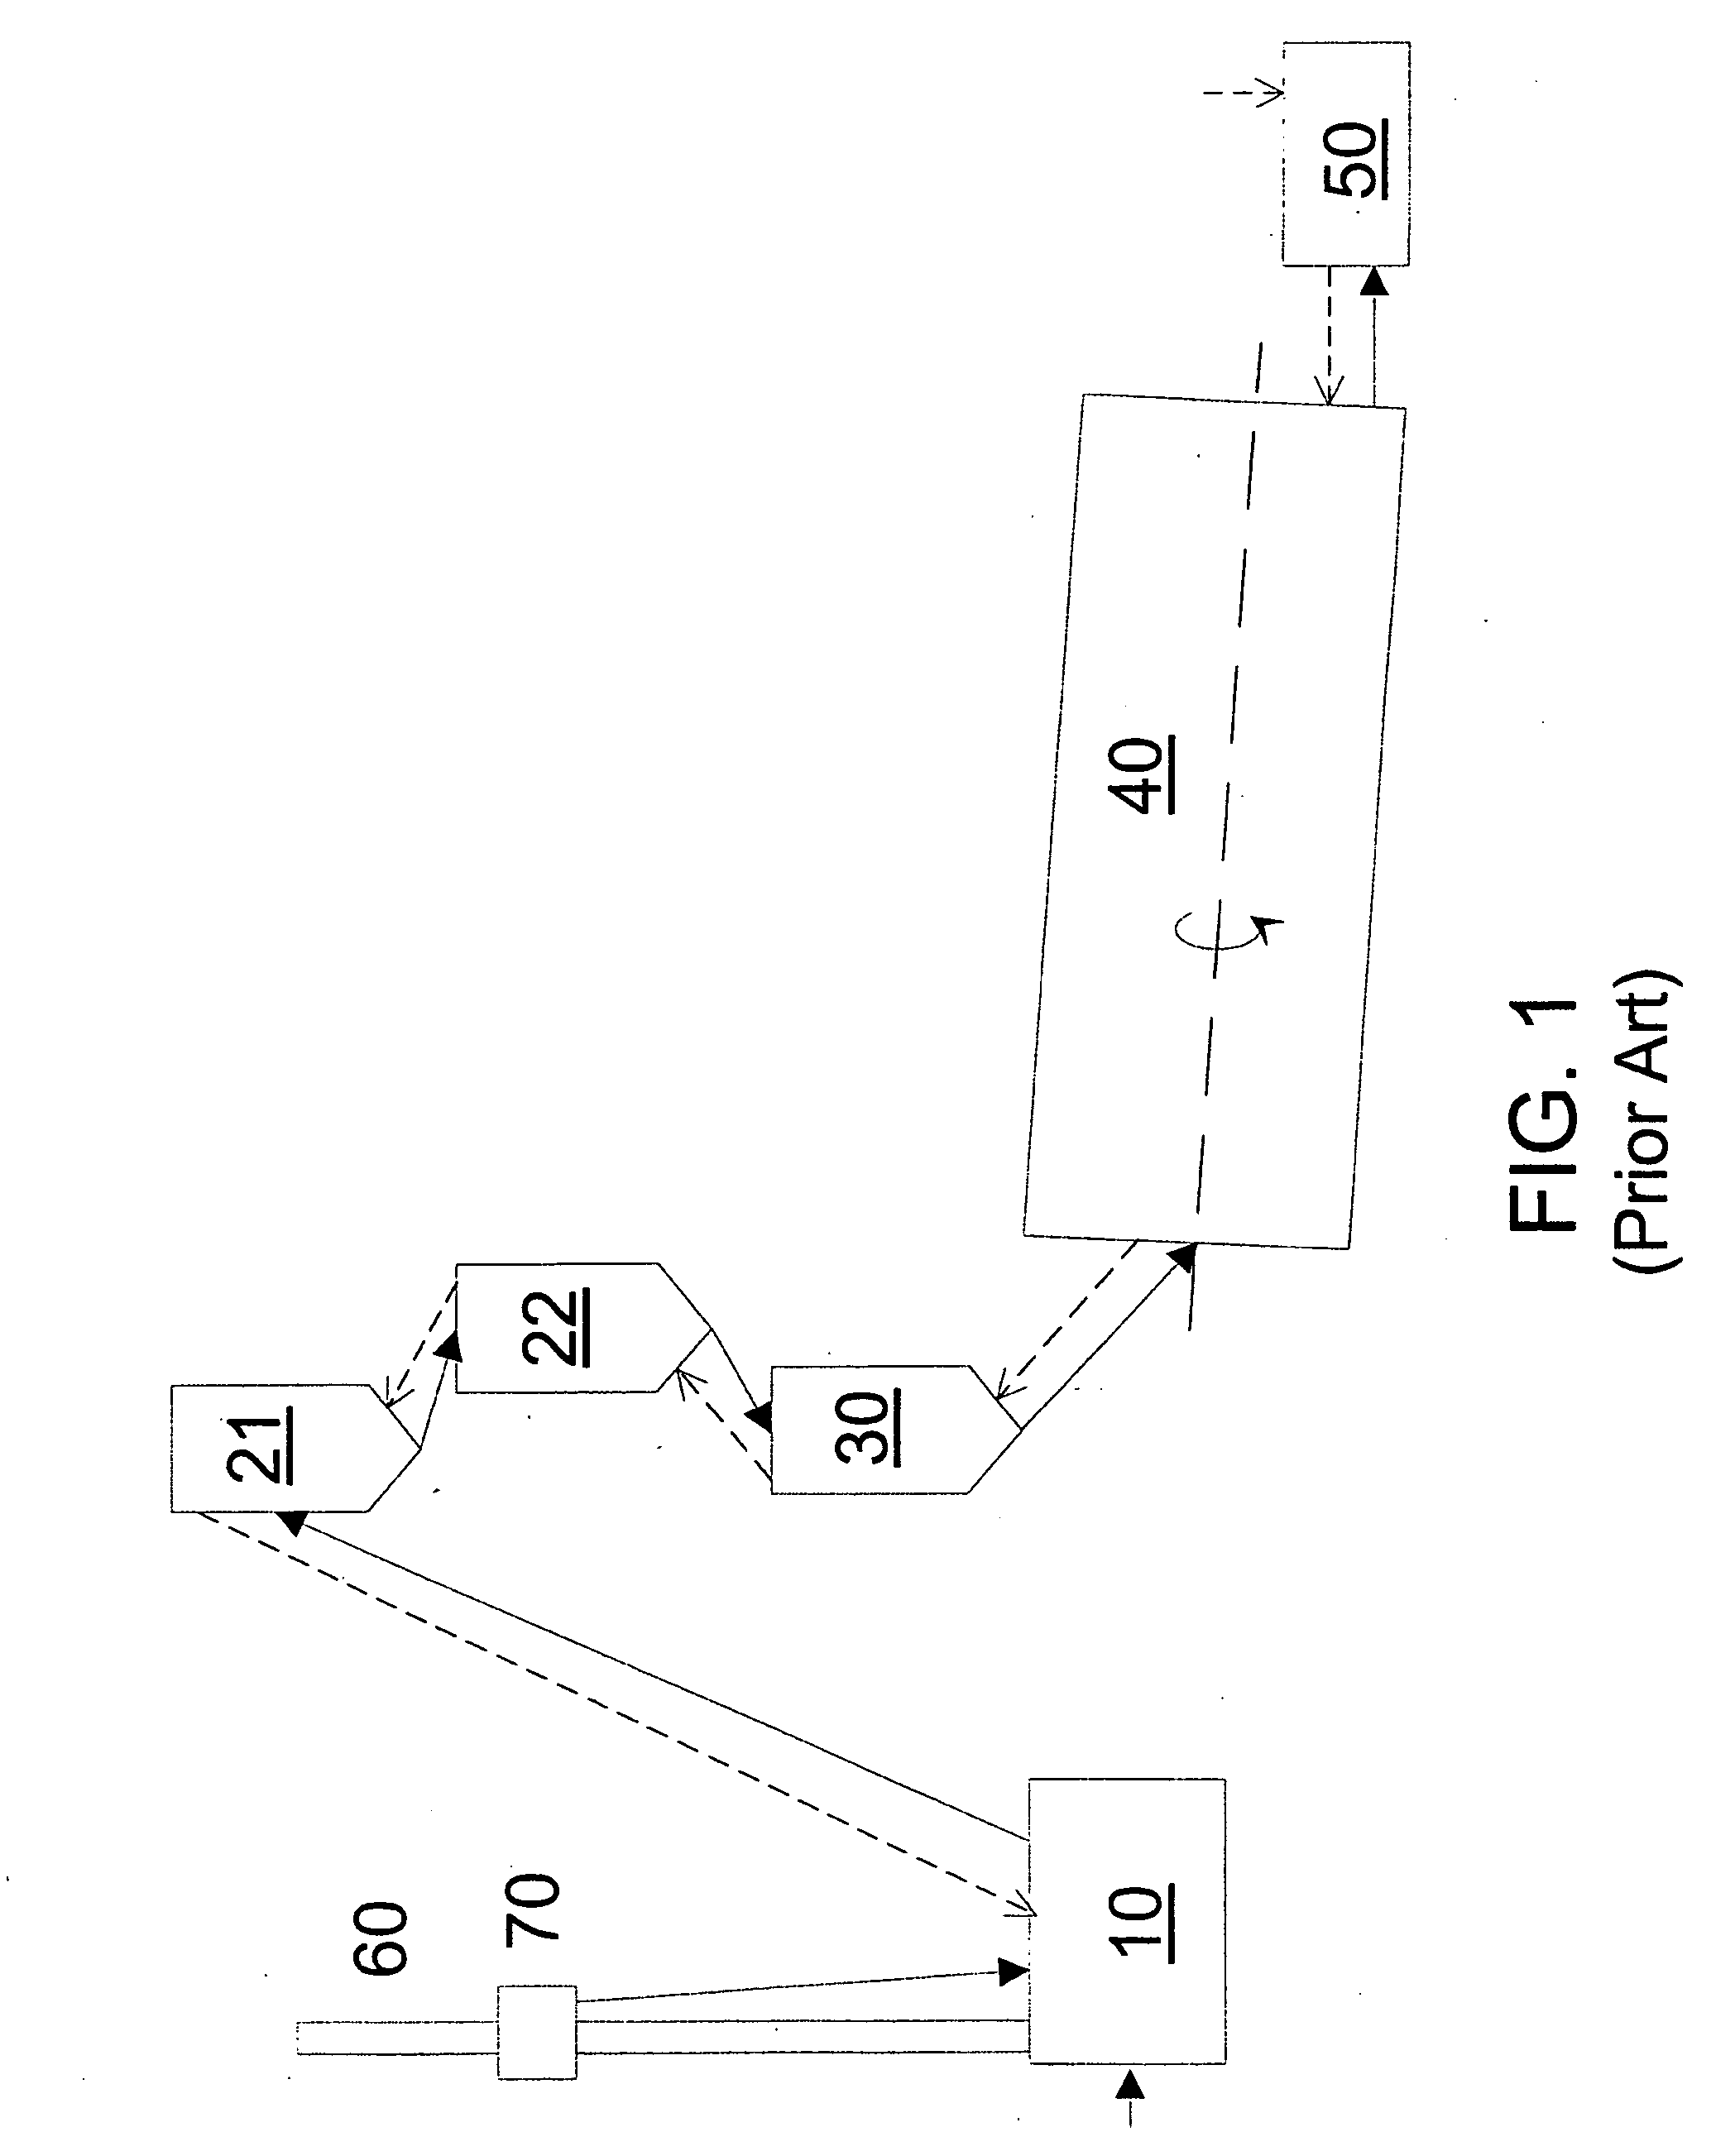 Method and apparatus for controlling pollution from a cement plant